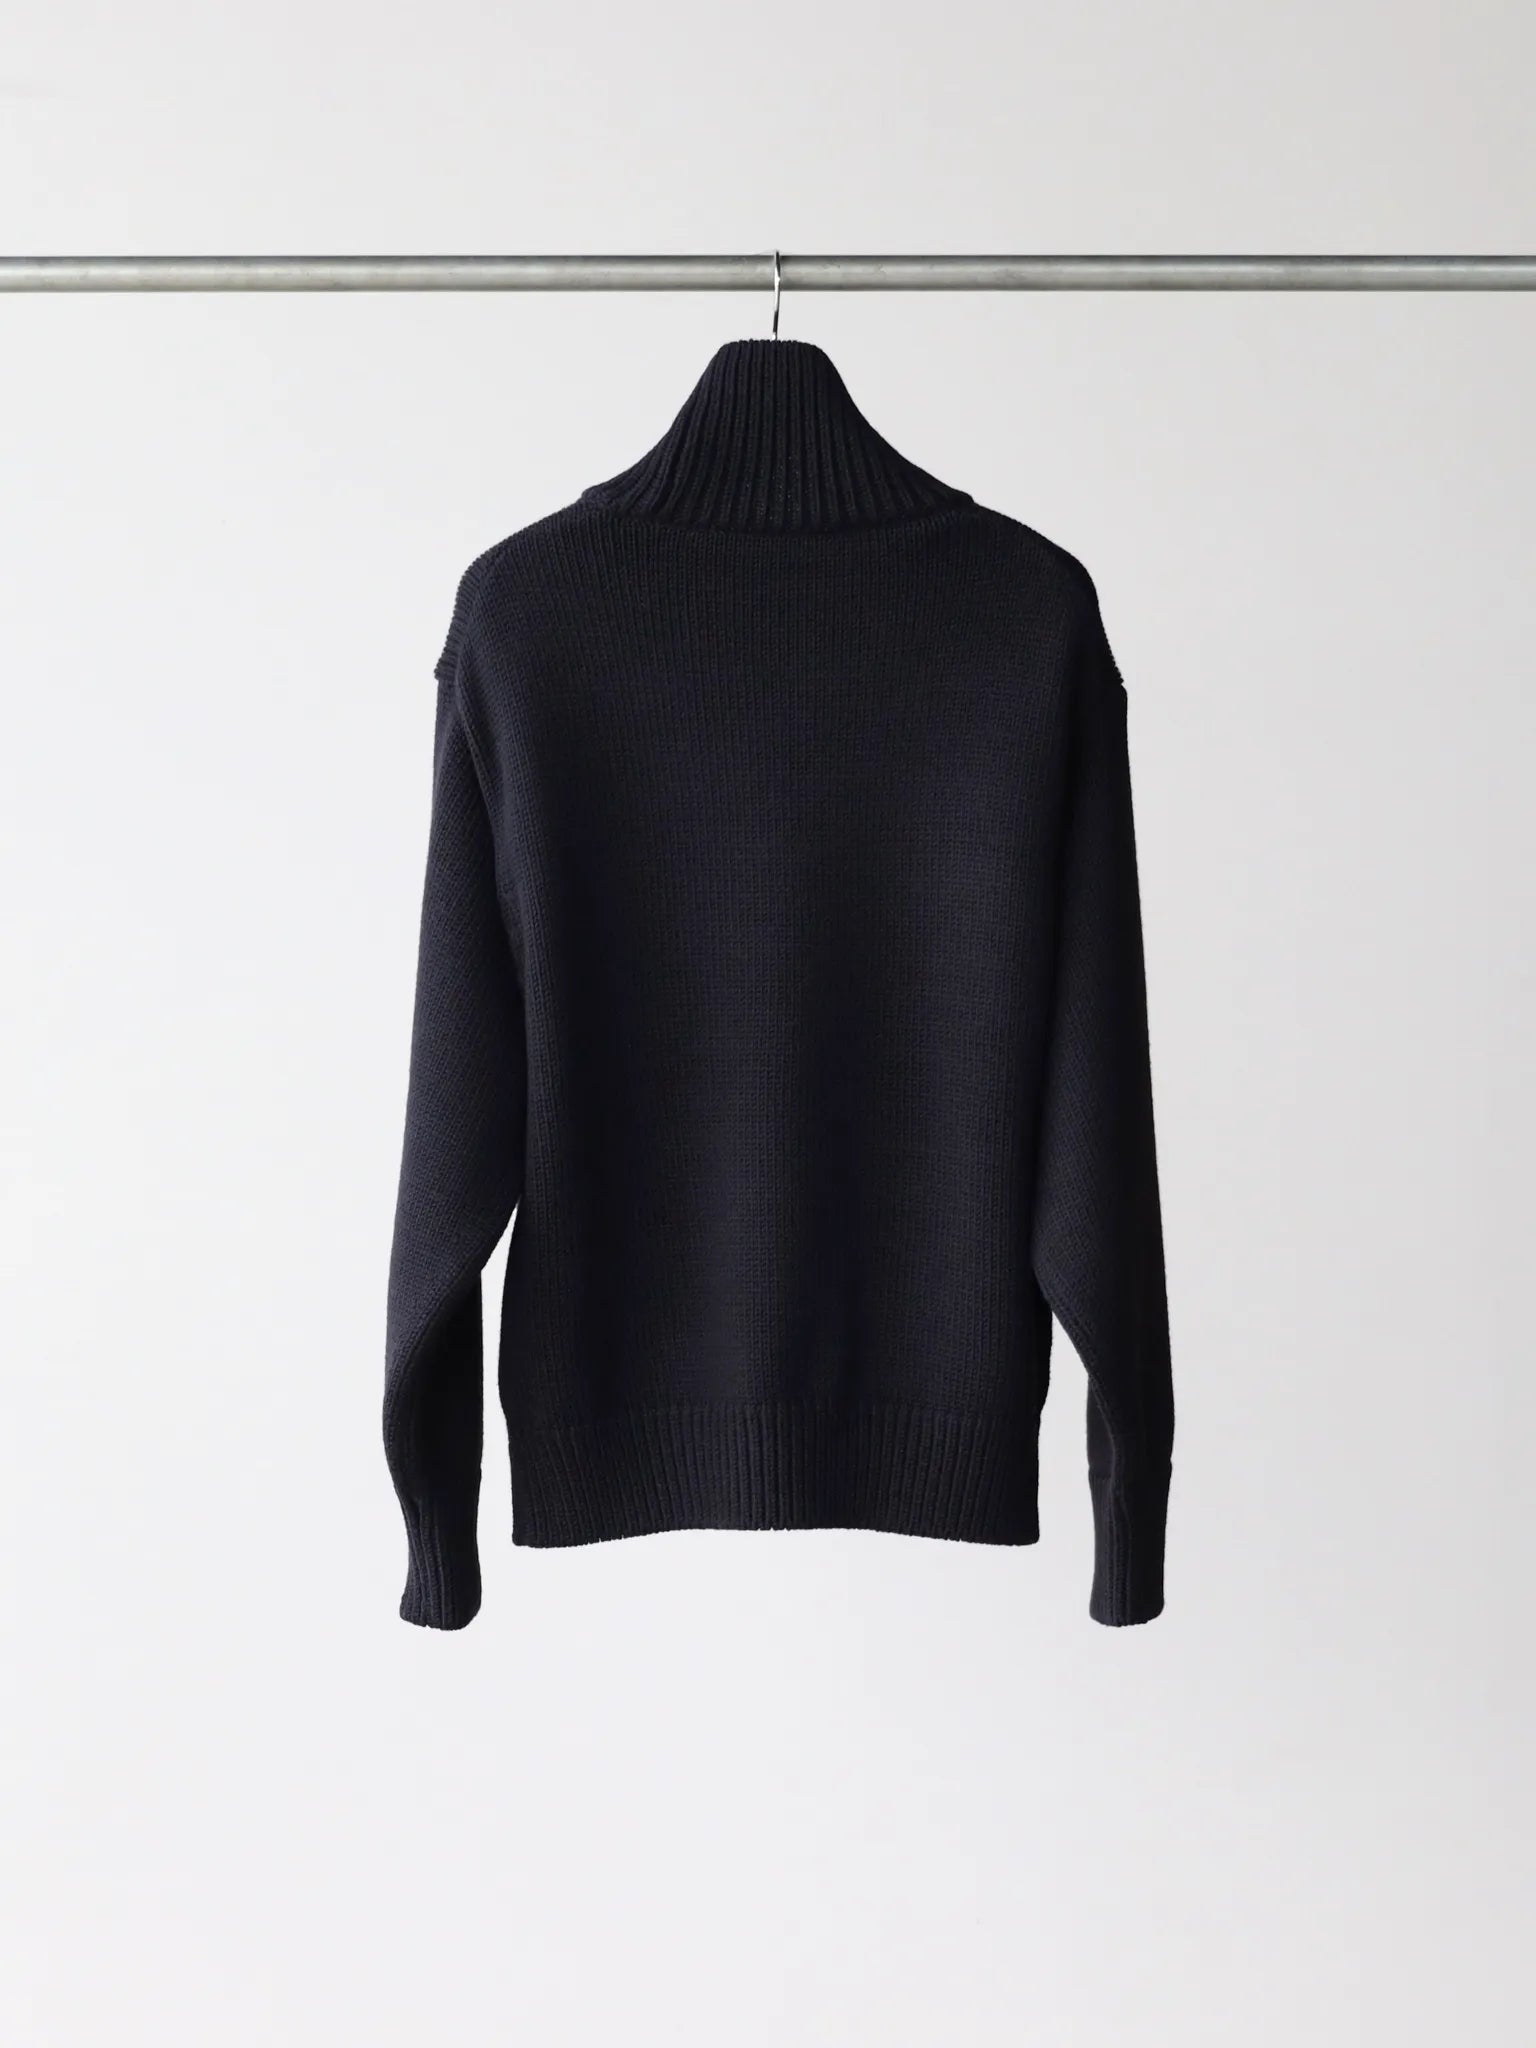 olde-h-daughter-wool-turtle-neck-p-o-midnight-4